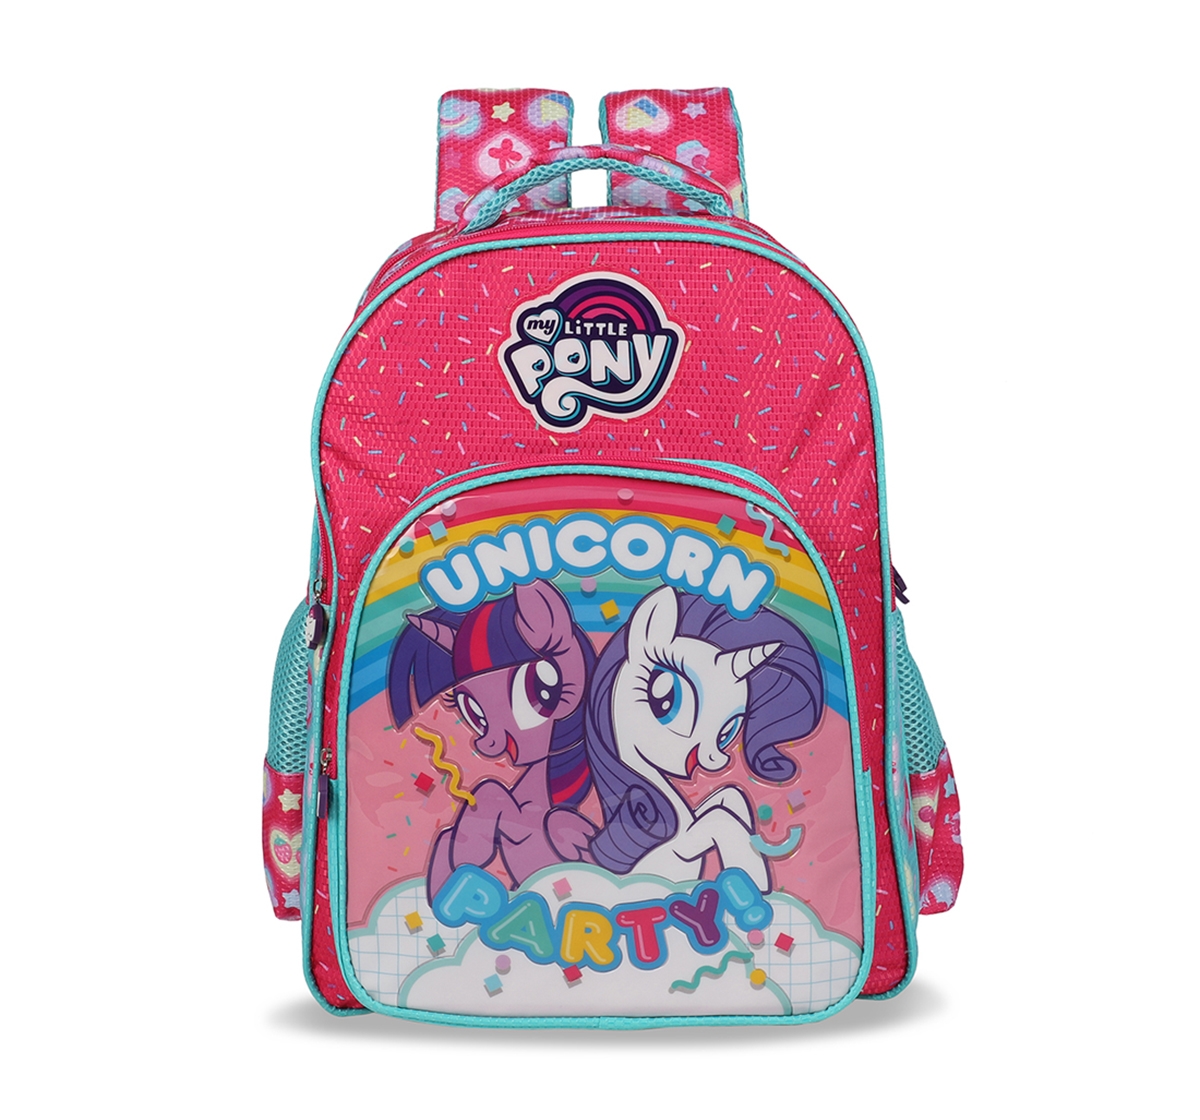 My Little Pony | My Little Pony My Little Pony Unicorn Party School Bag 41 Cm Bags for Girls age 7Y+ (Pink) 0